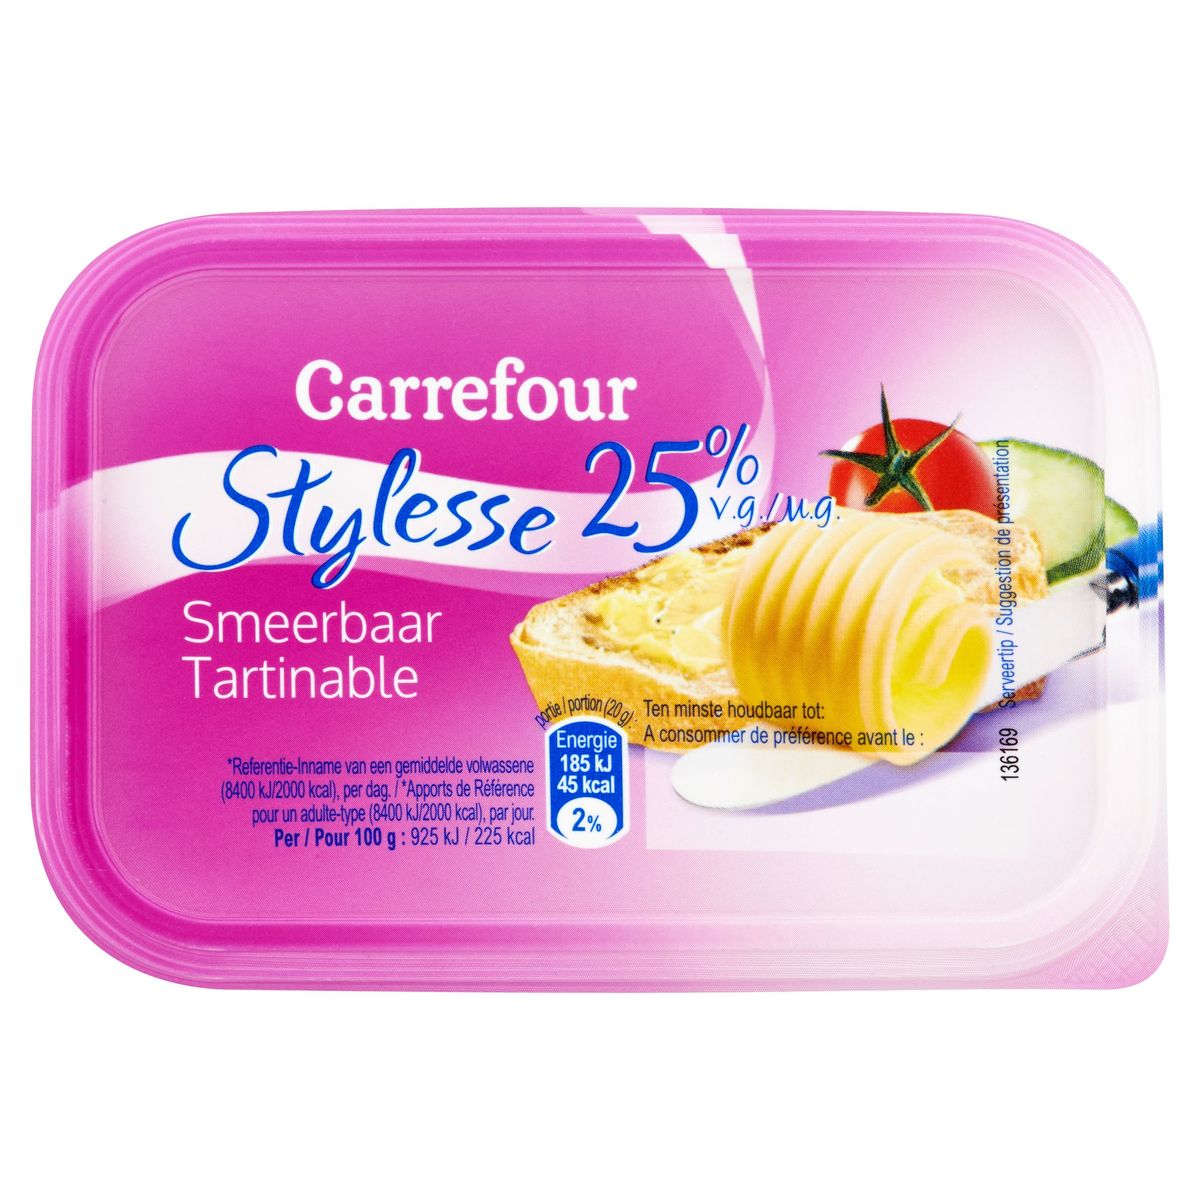 Carrefour Stylesse 25% M.G. Tartinable 250 g